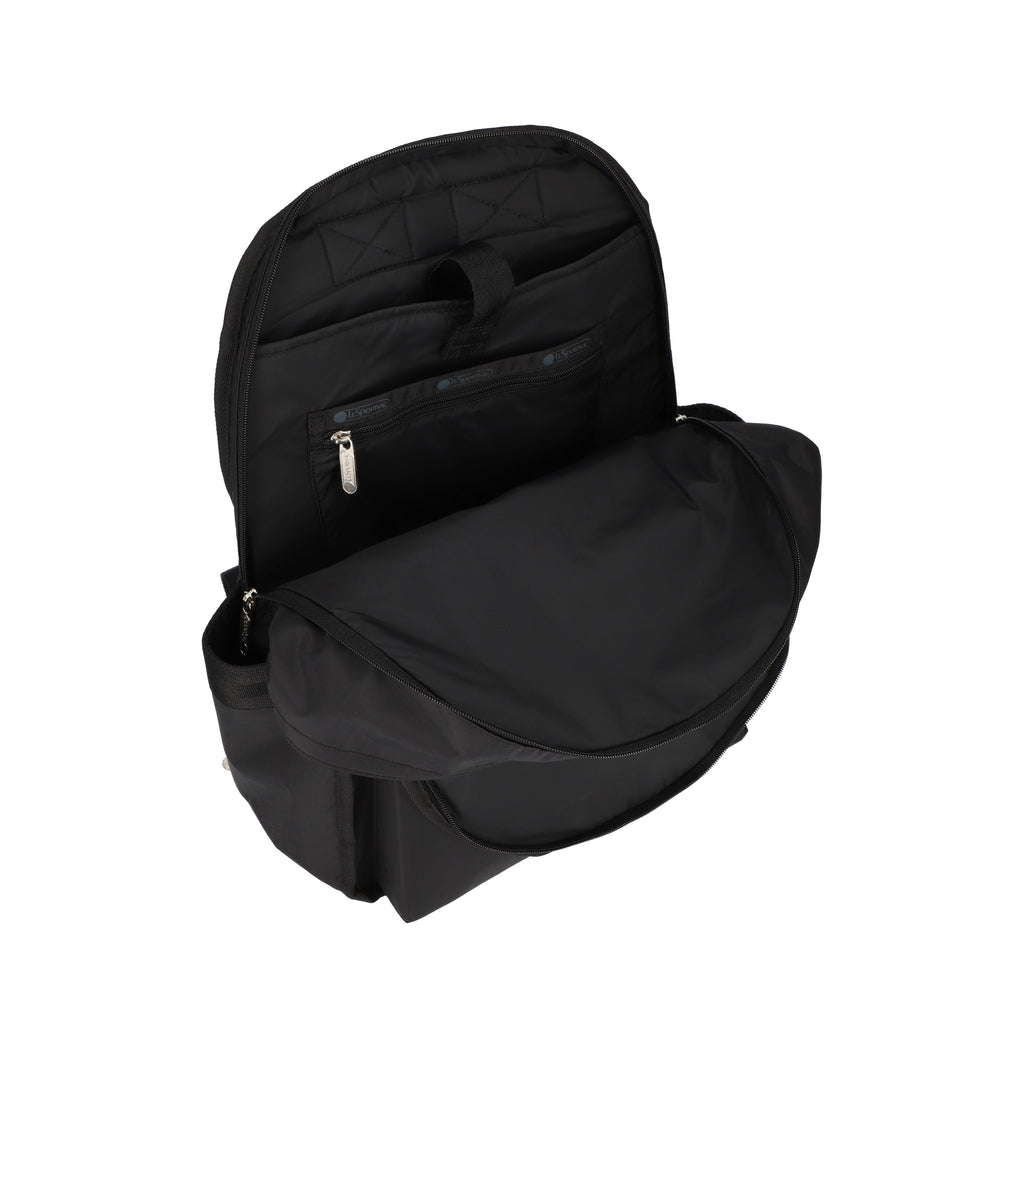 Route Backpack - Black solid – LeSportsac